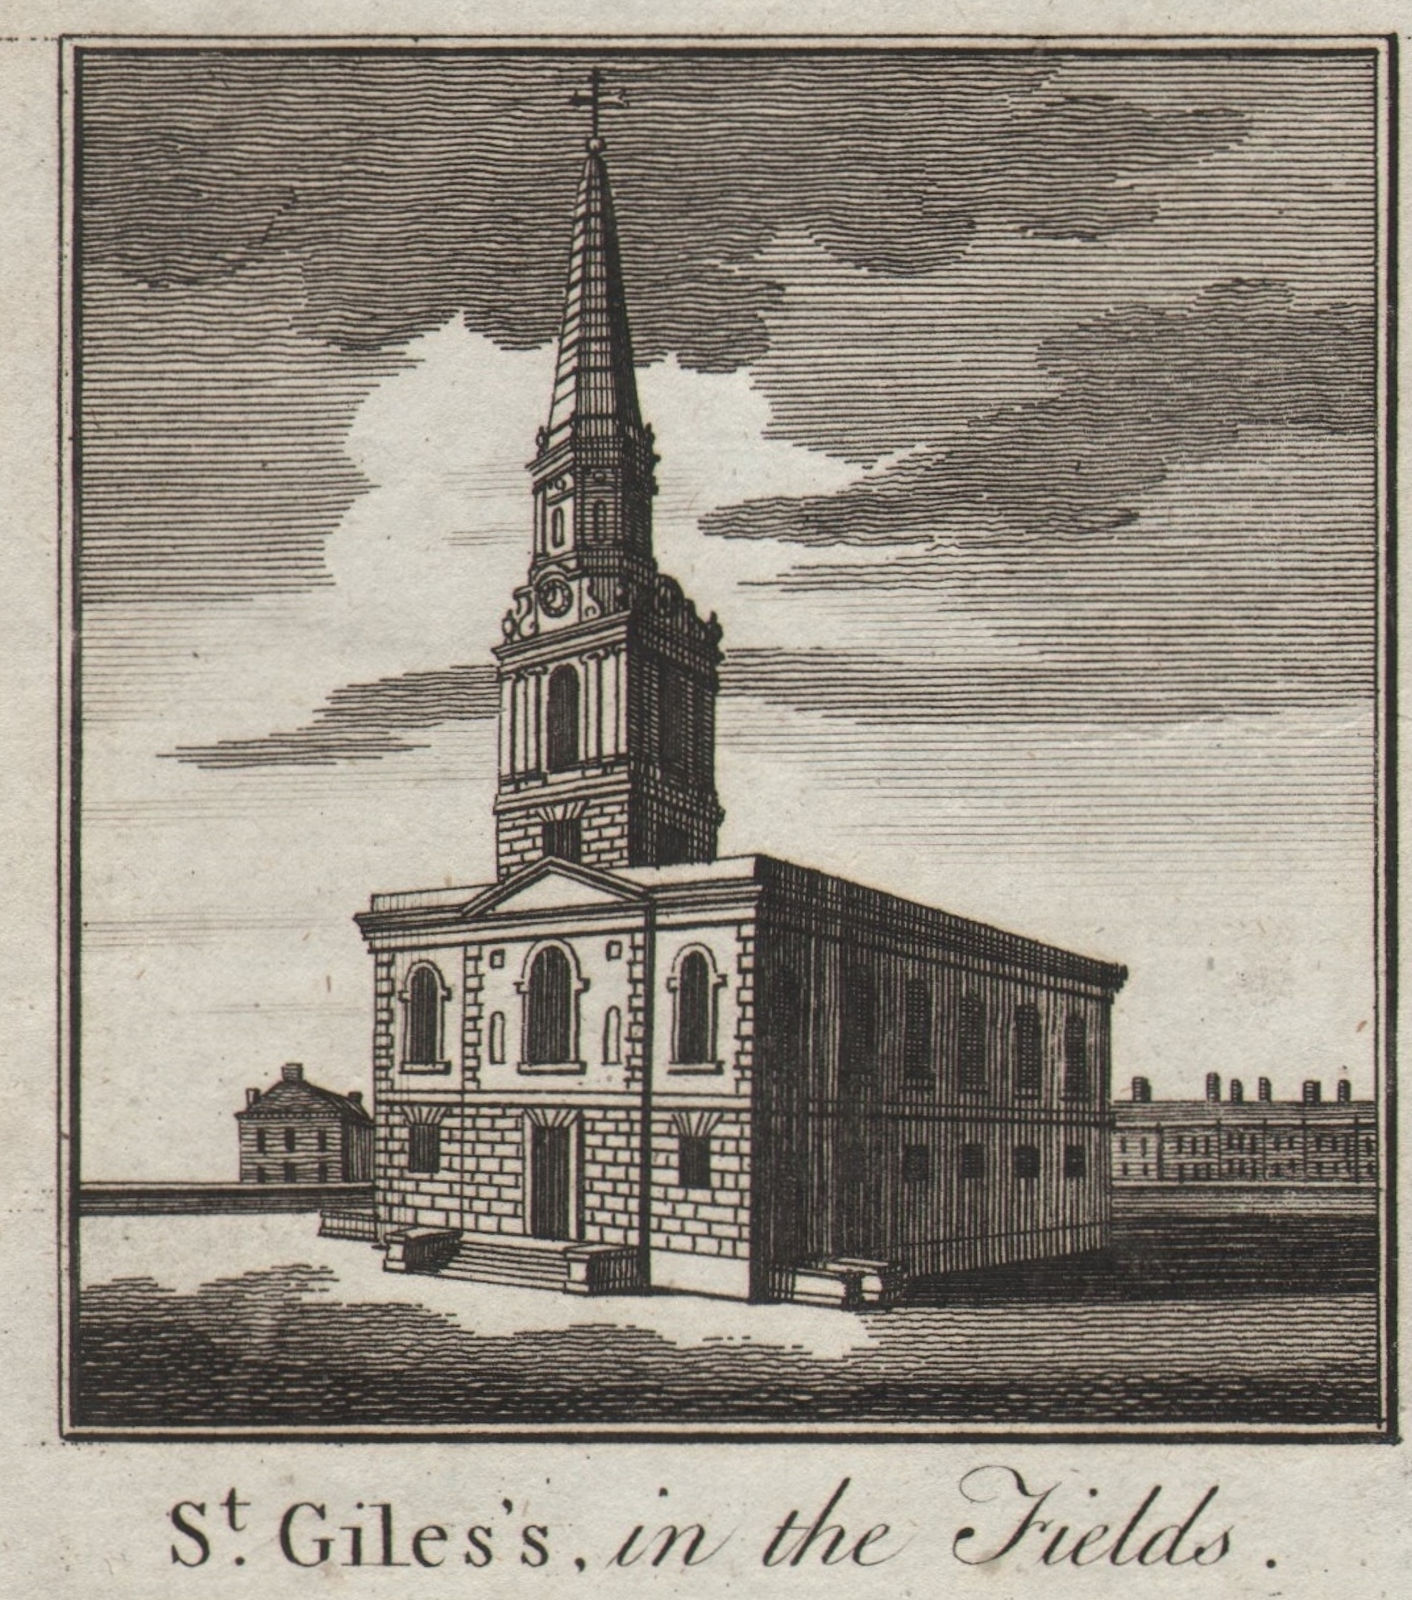 St. Giles-in-the-Fields church. Camden. Henry Flitcroft. SMALL. THORNTON 1784